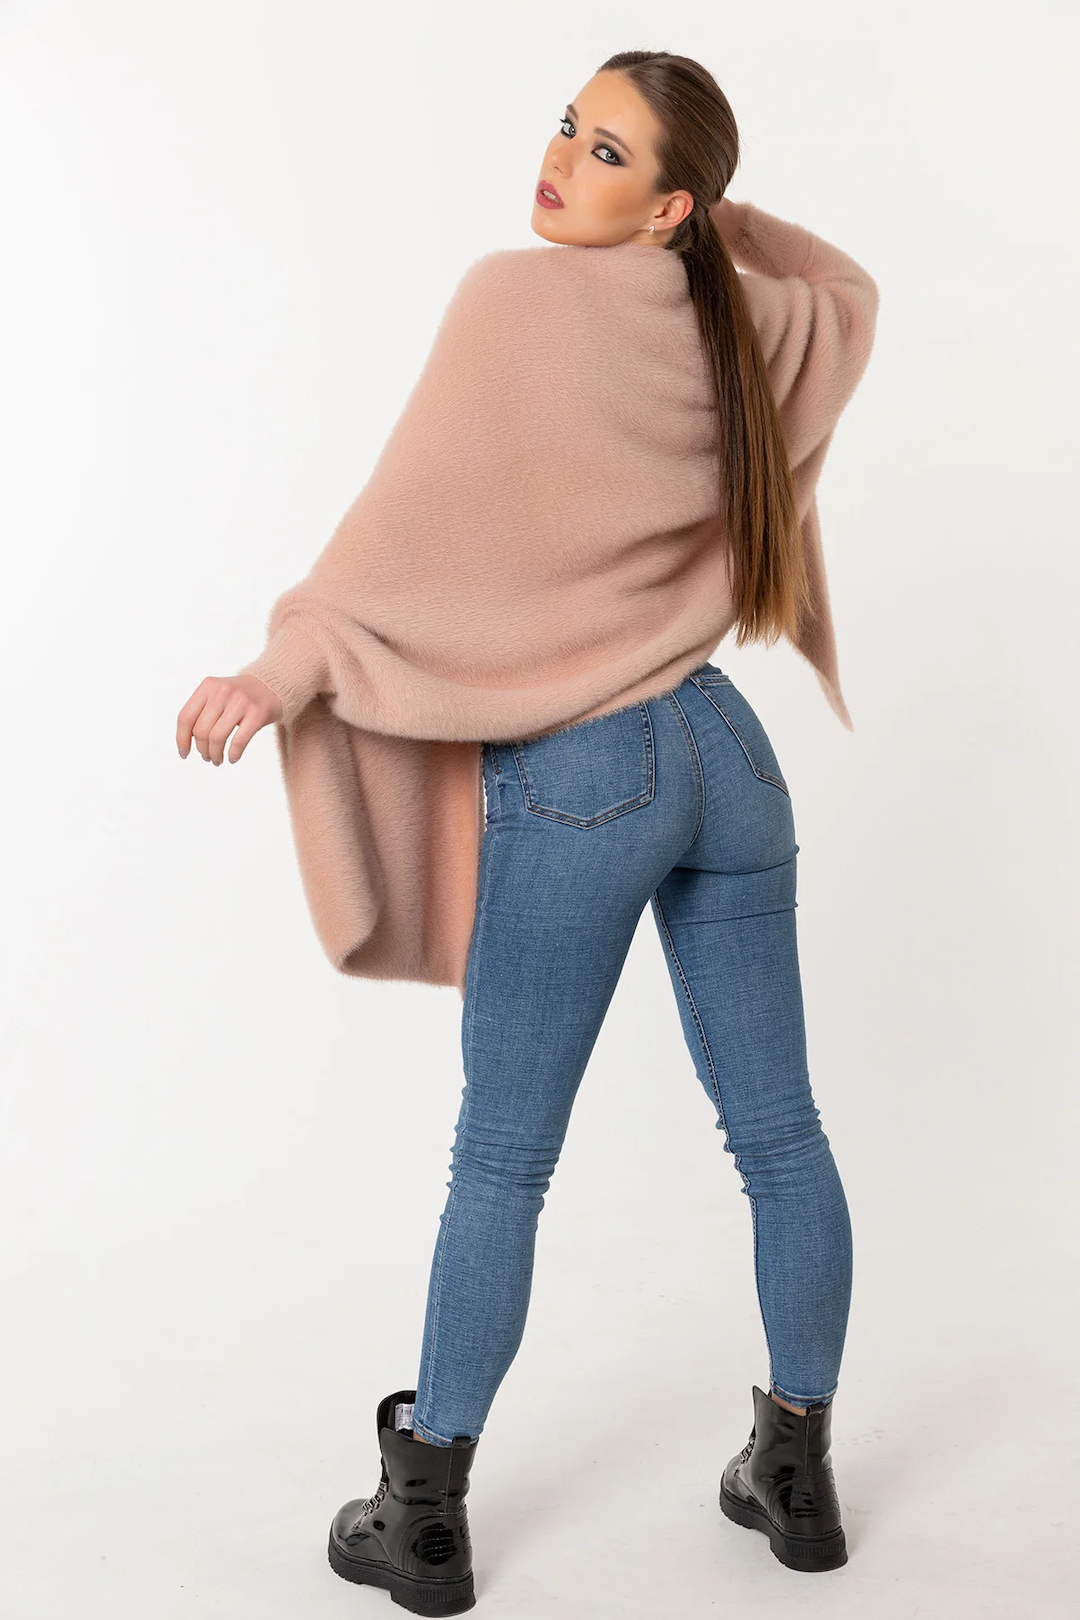 Fuzzy Poncho Shawl with Sleeves - Blush Pink